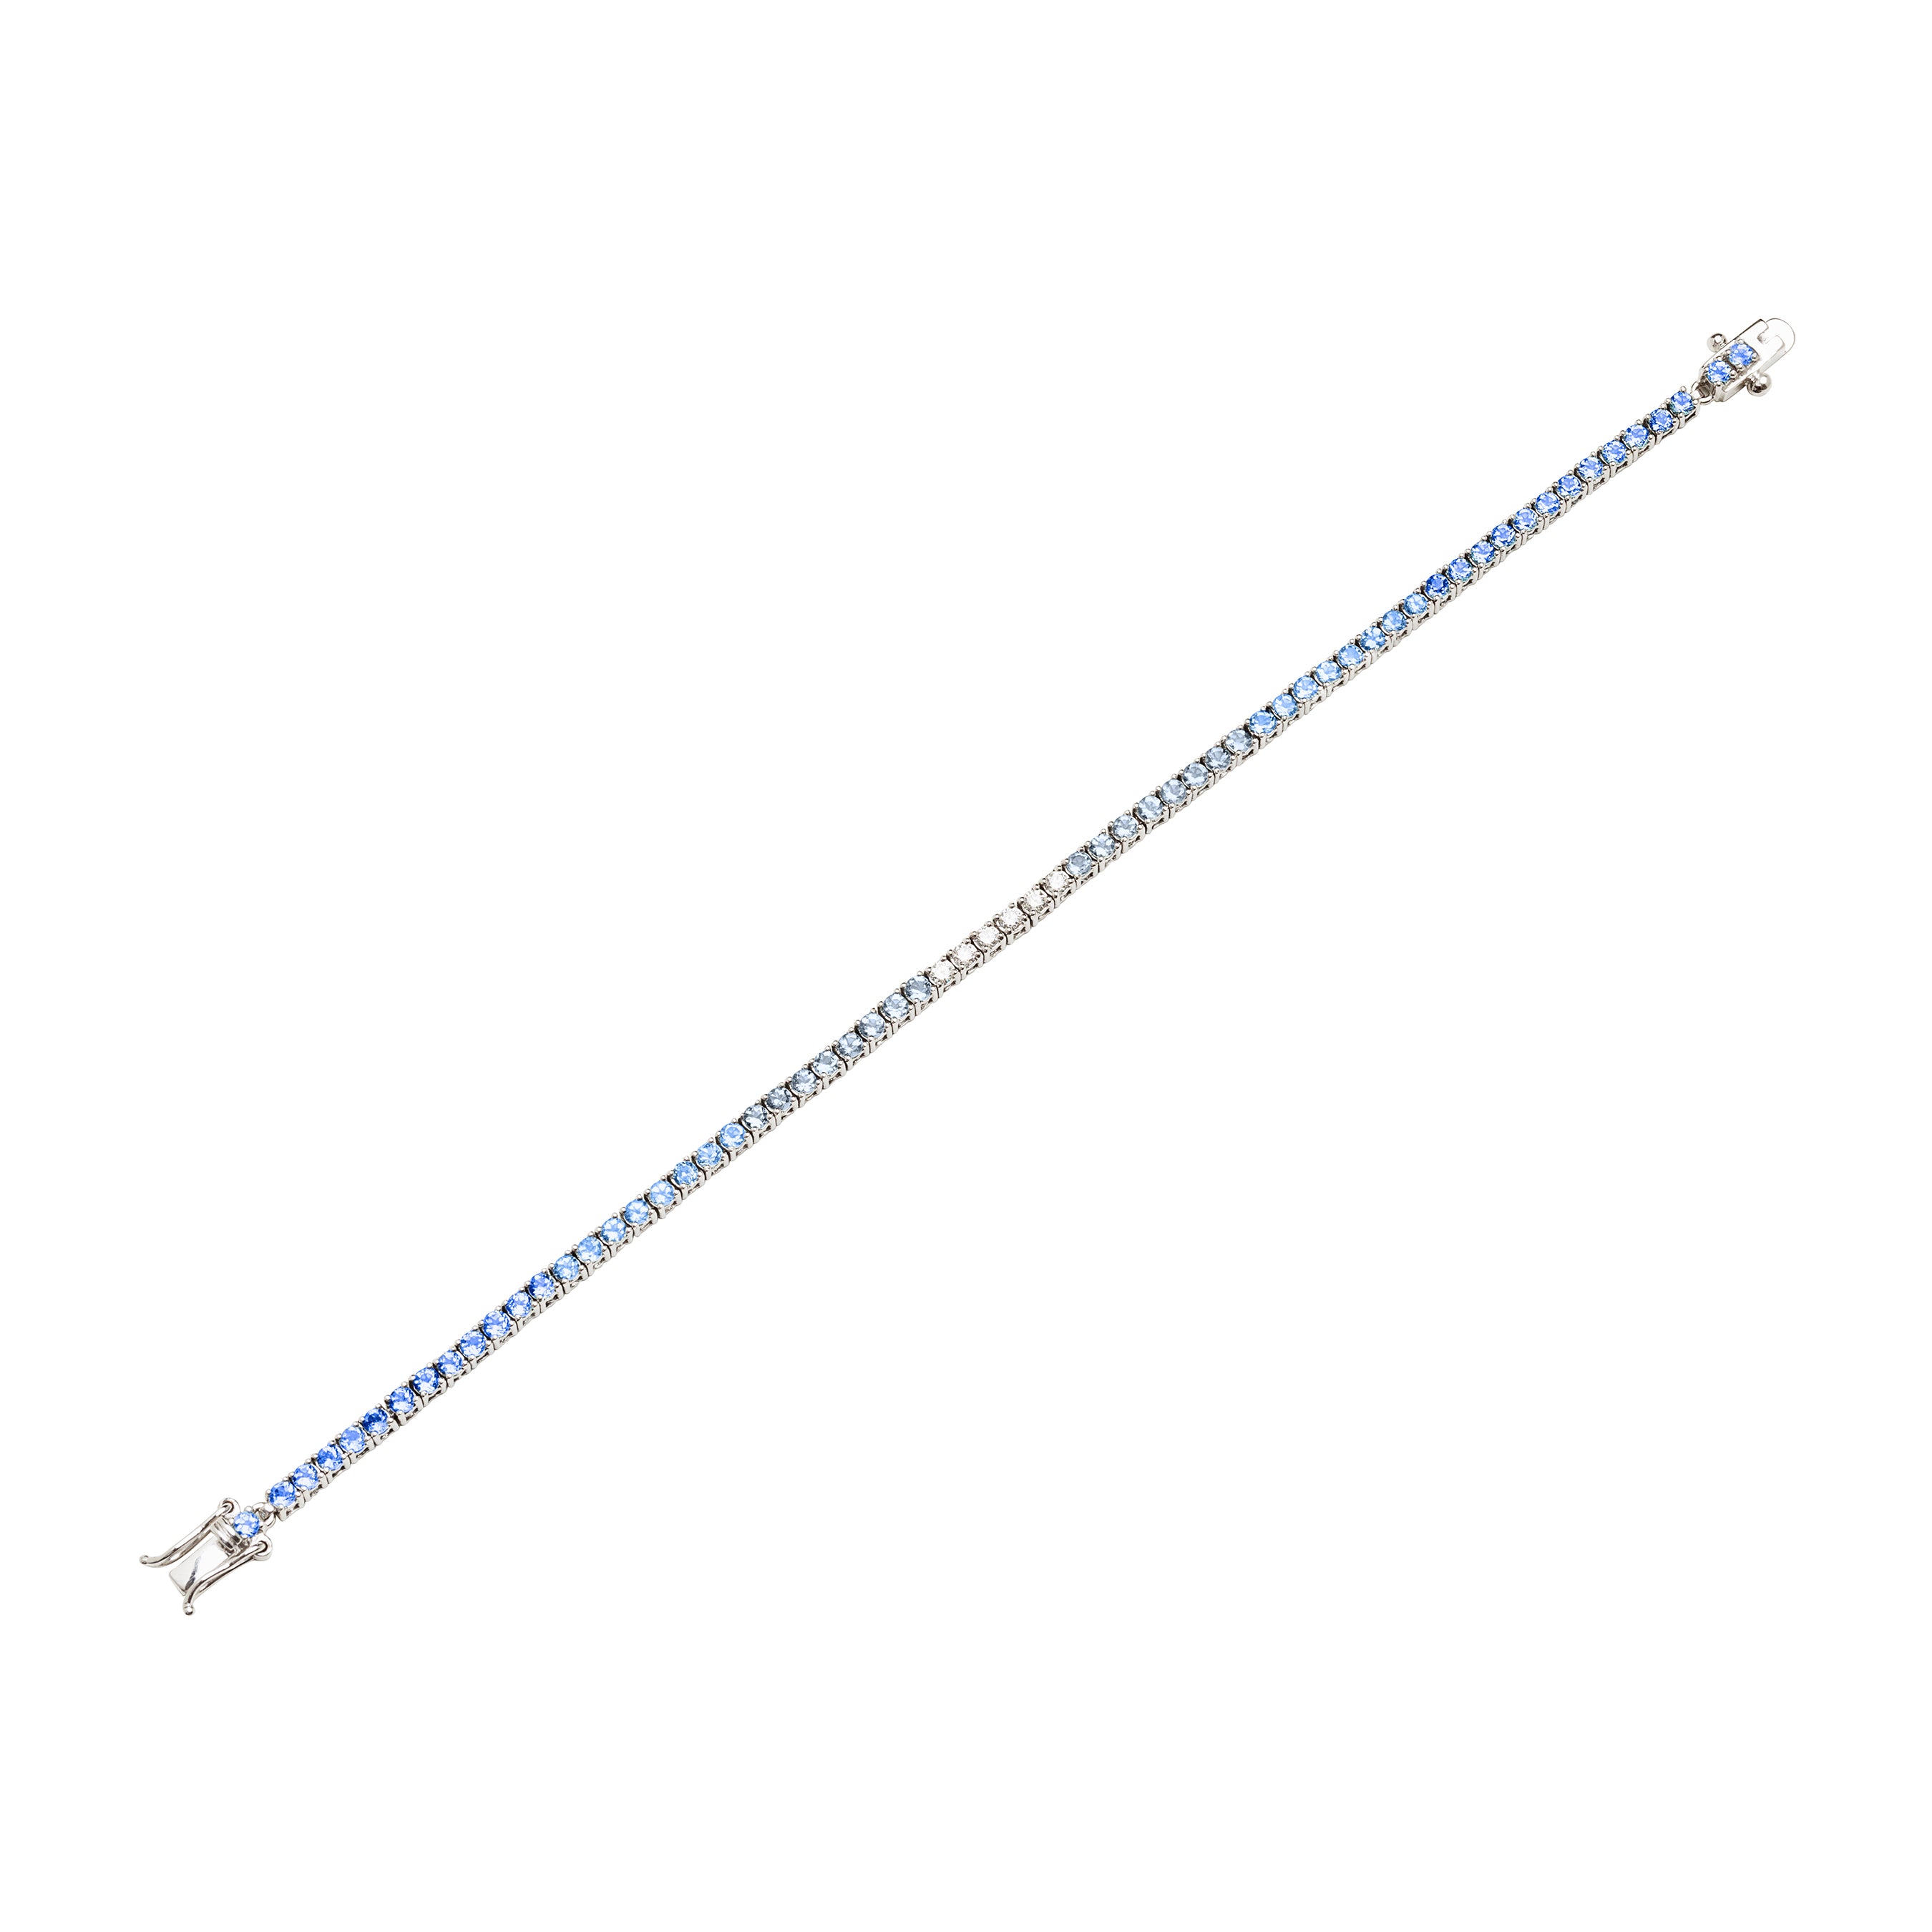 Pop aquamarine and diamond tennis bracelet, 10K solid rhodium plated white gold. This iconic tennis bracelet has a subtle blue twist! International shipping available.